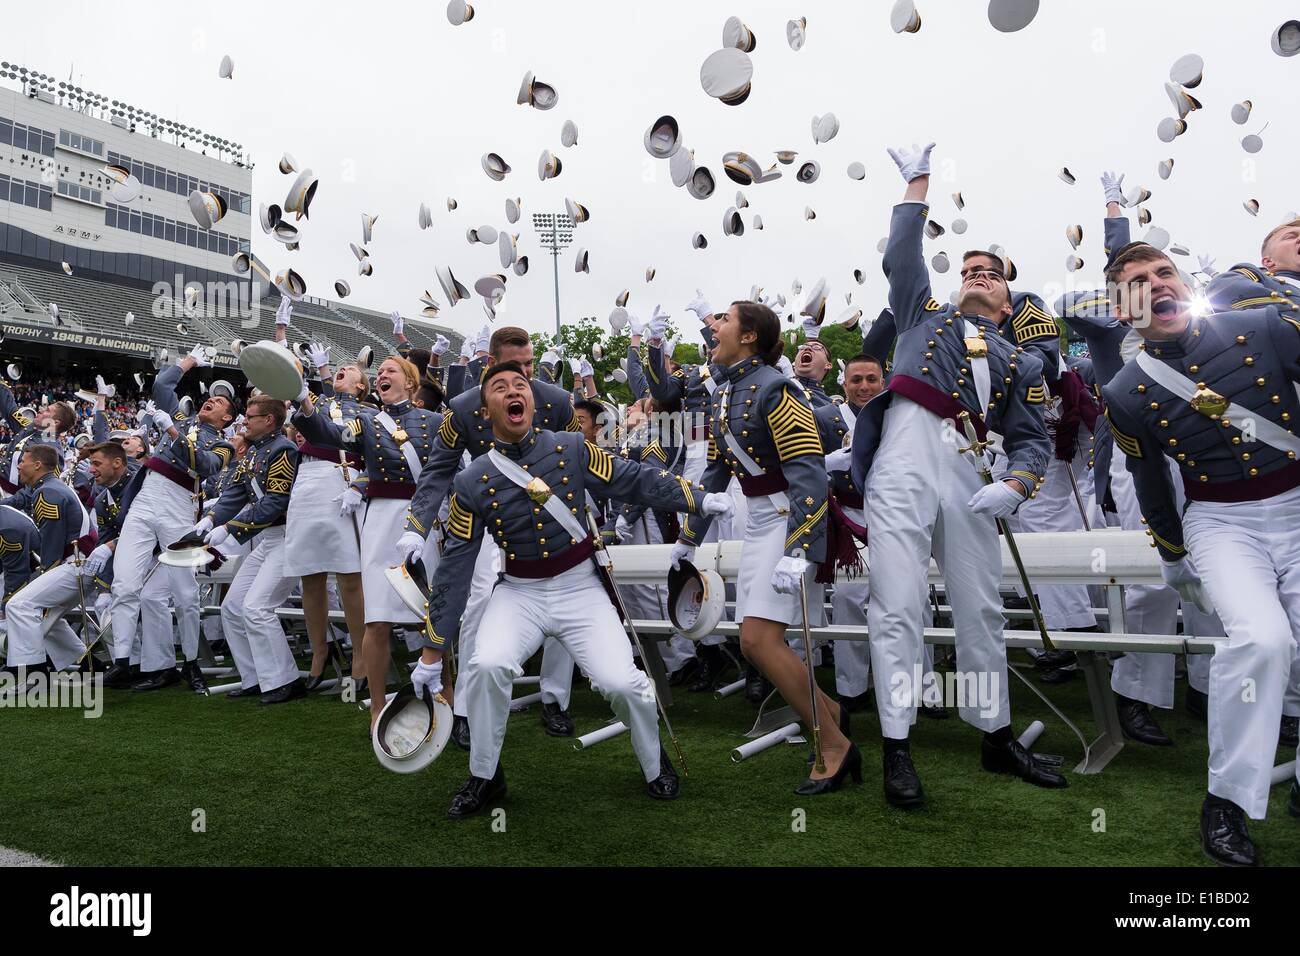 Cadets at the U.S. Military Academy in full parade dress  toss their hats into the air at the completion of the graduation ceremonies May 28, 2014 in West Point, New York. More than 1,000 cadets of Class of 2014 received their diplomas in Michie Stadium and were Commissioned second lieutenants in the U.S. Army. Stock Photo